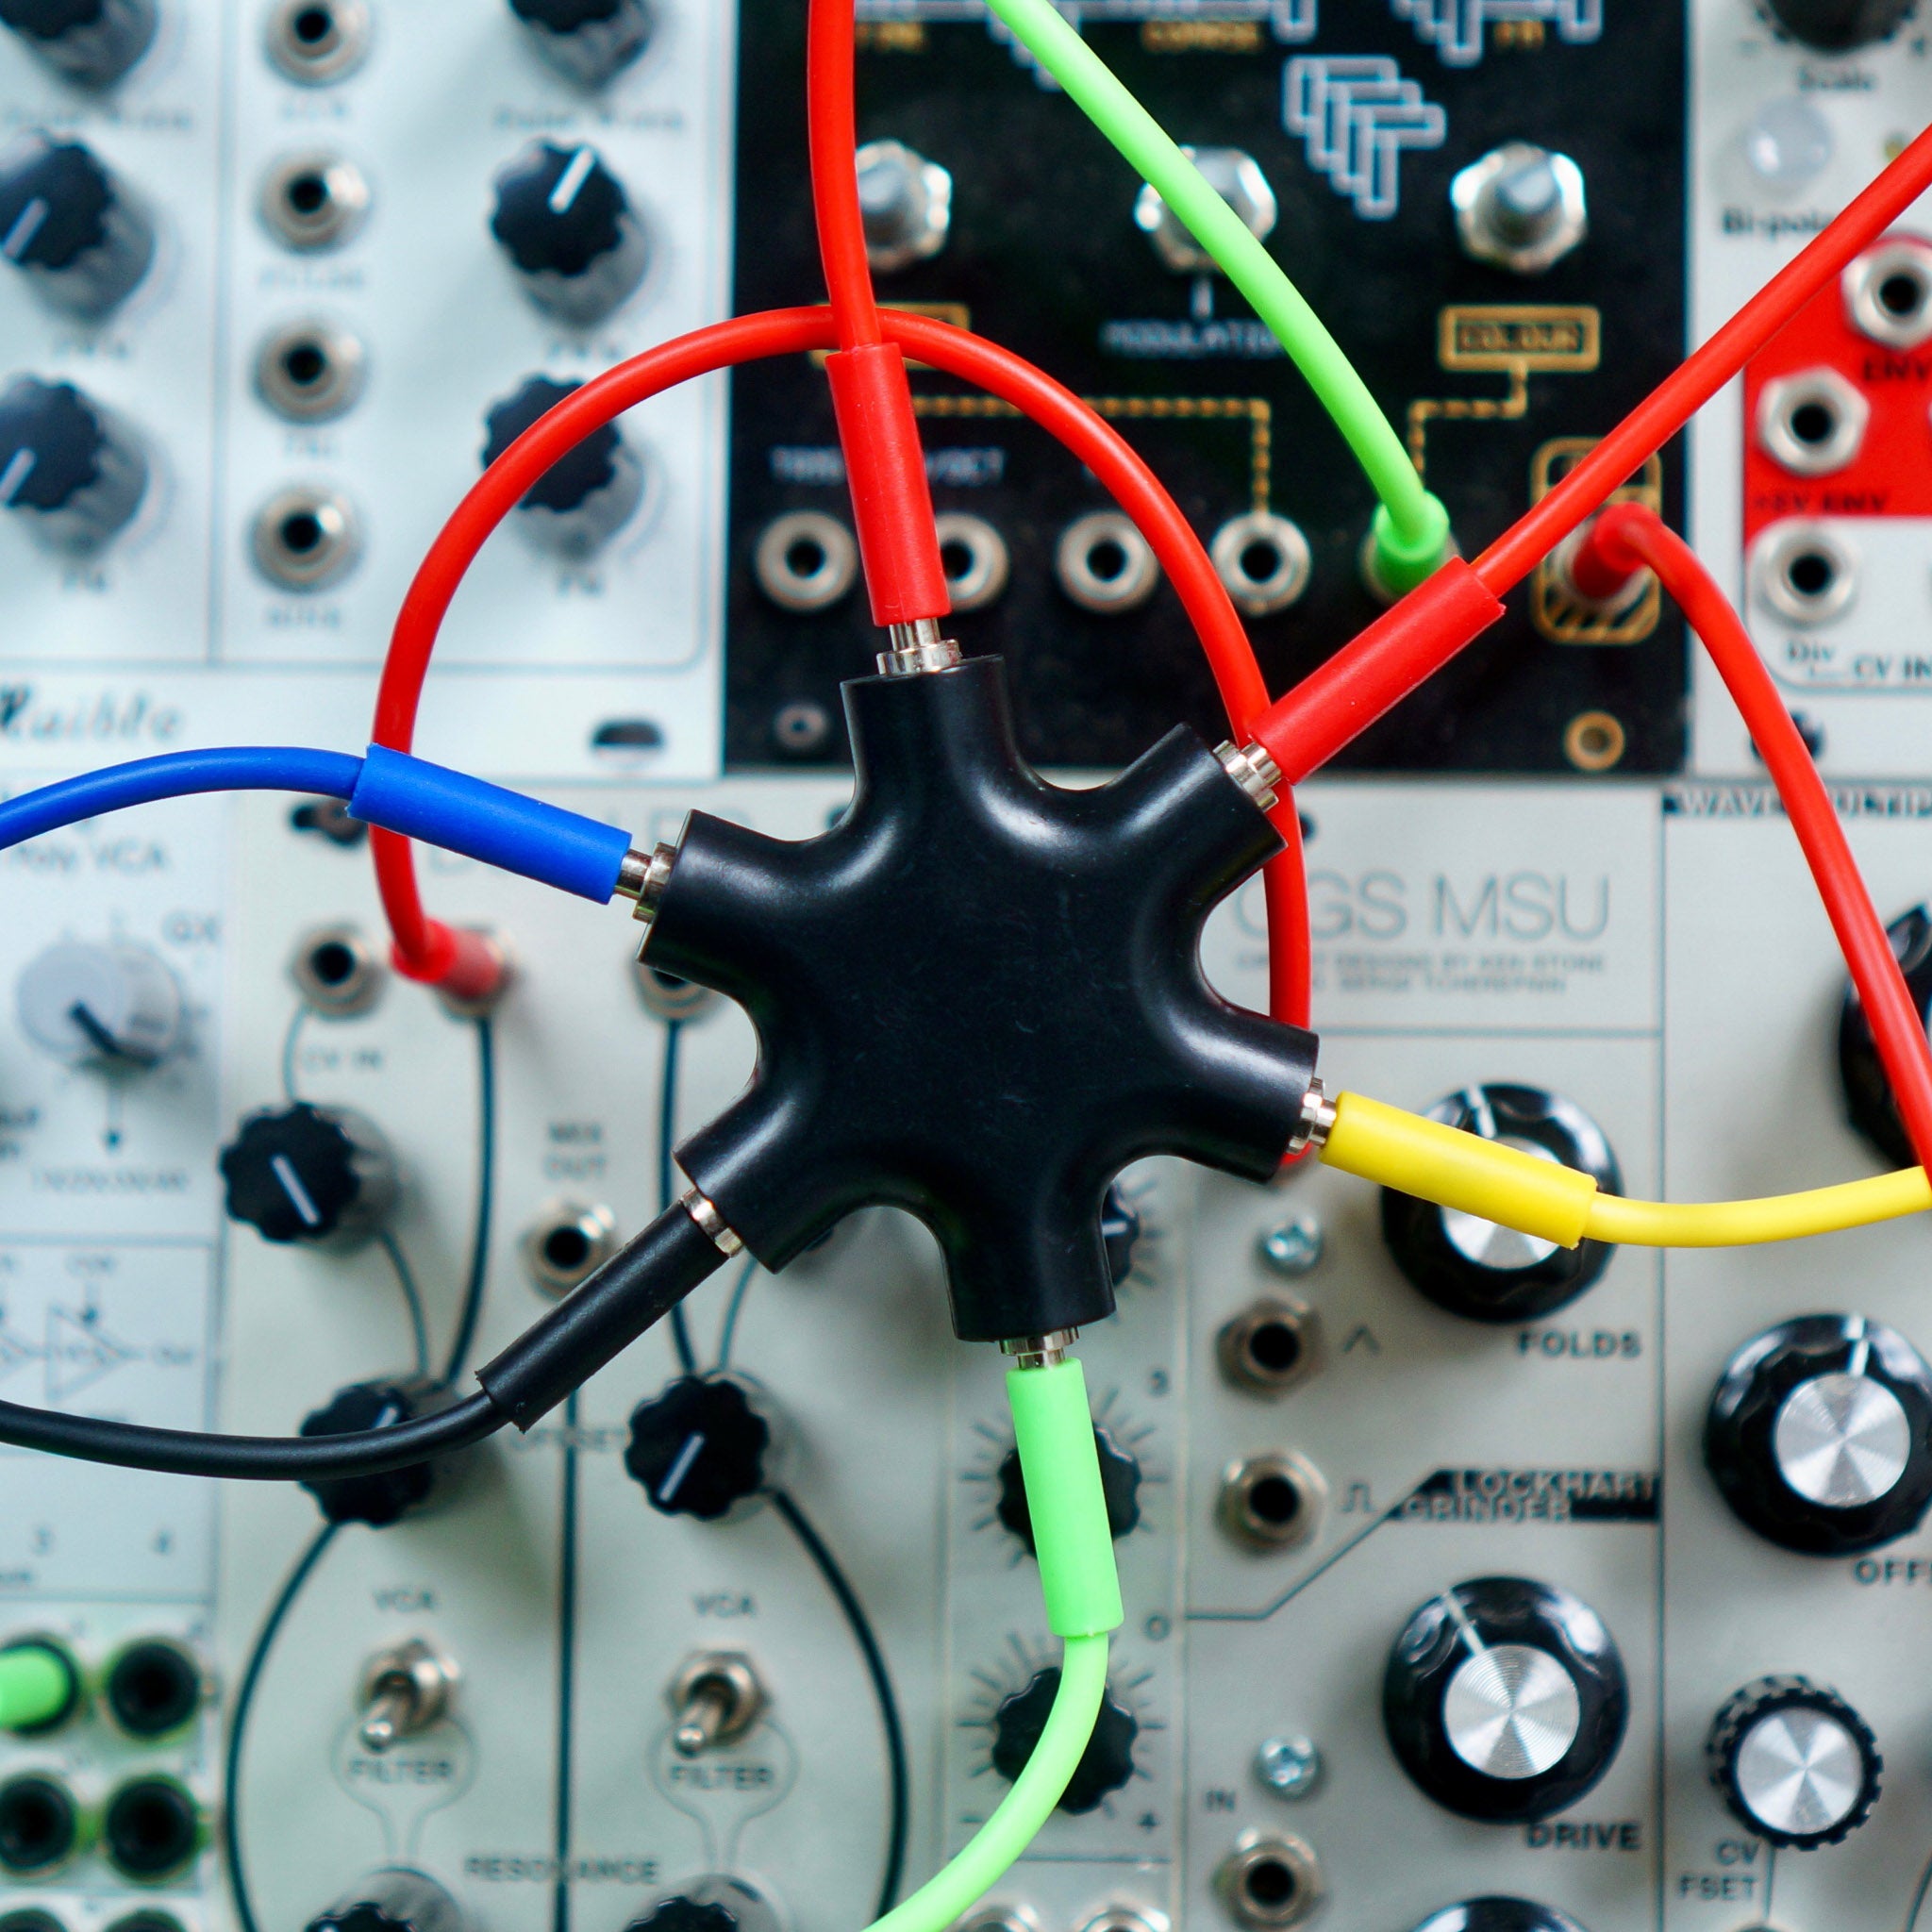 Modular Synth Accessories